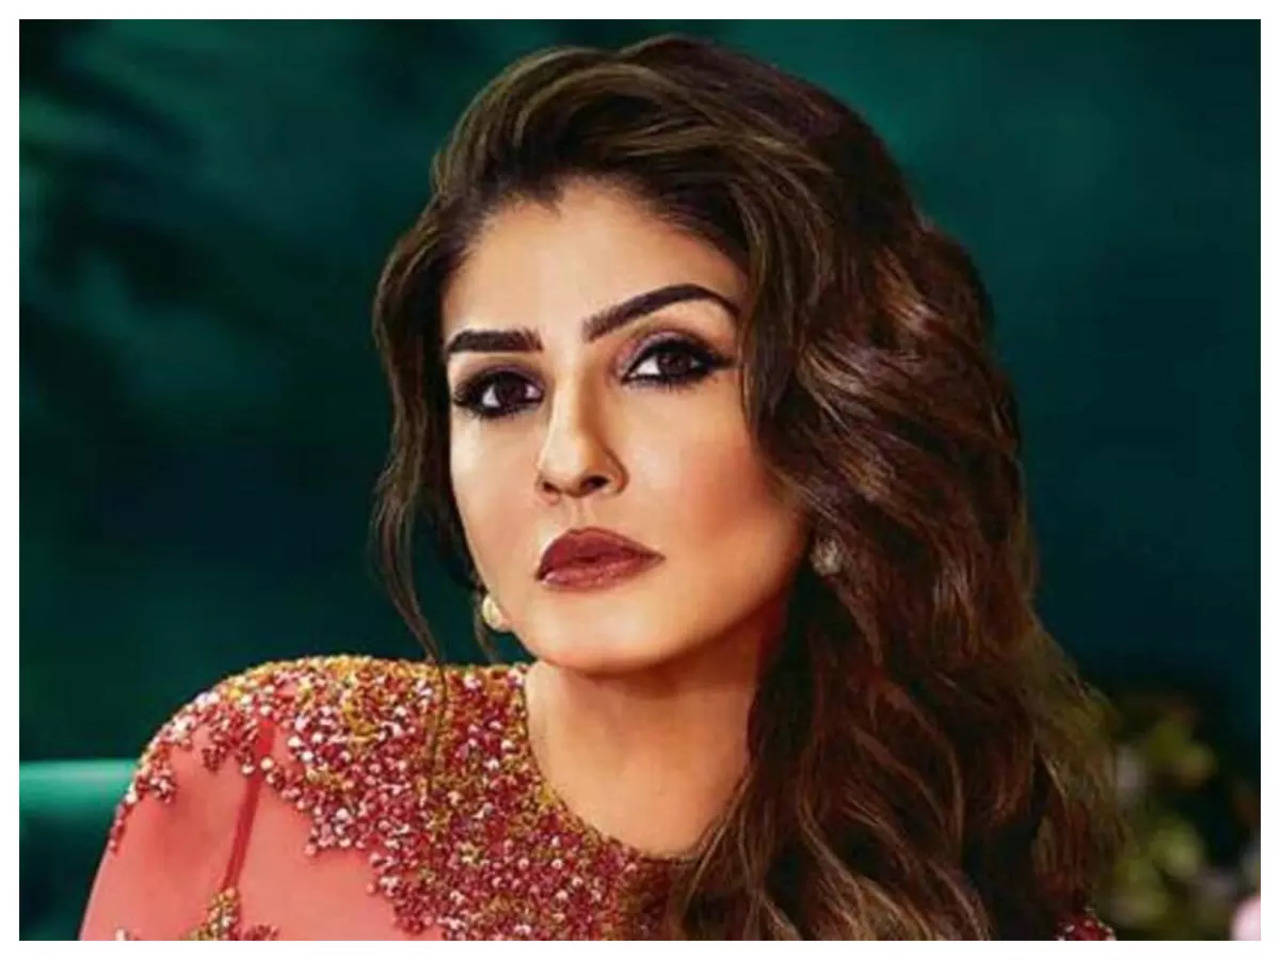 Ravina Tandan Ki Chudai Sex - Raveena Tandon talks about how actresses are treated by media; asks why  Madhuri Dixit is called 'superstar of 90's' but Aamir Khan isn't | Hindi  Movie News - Times of India